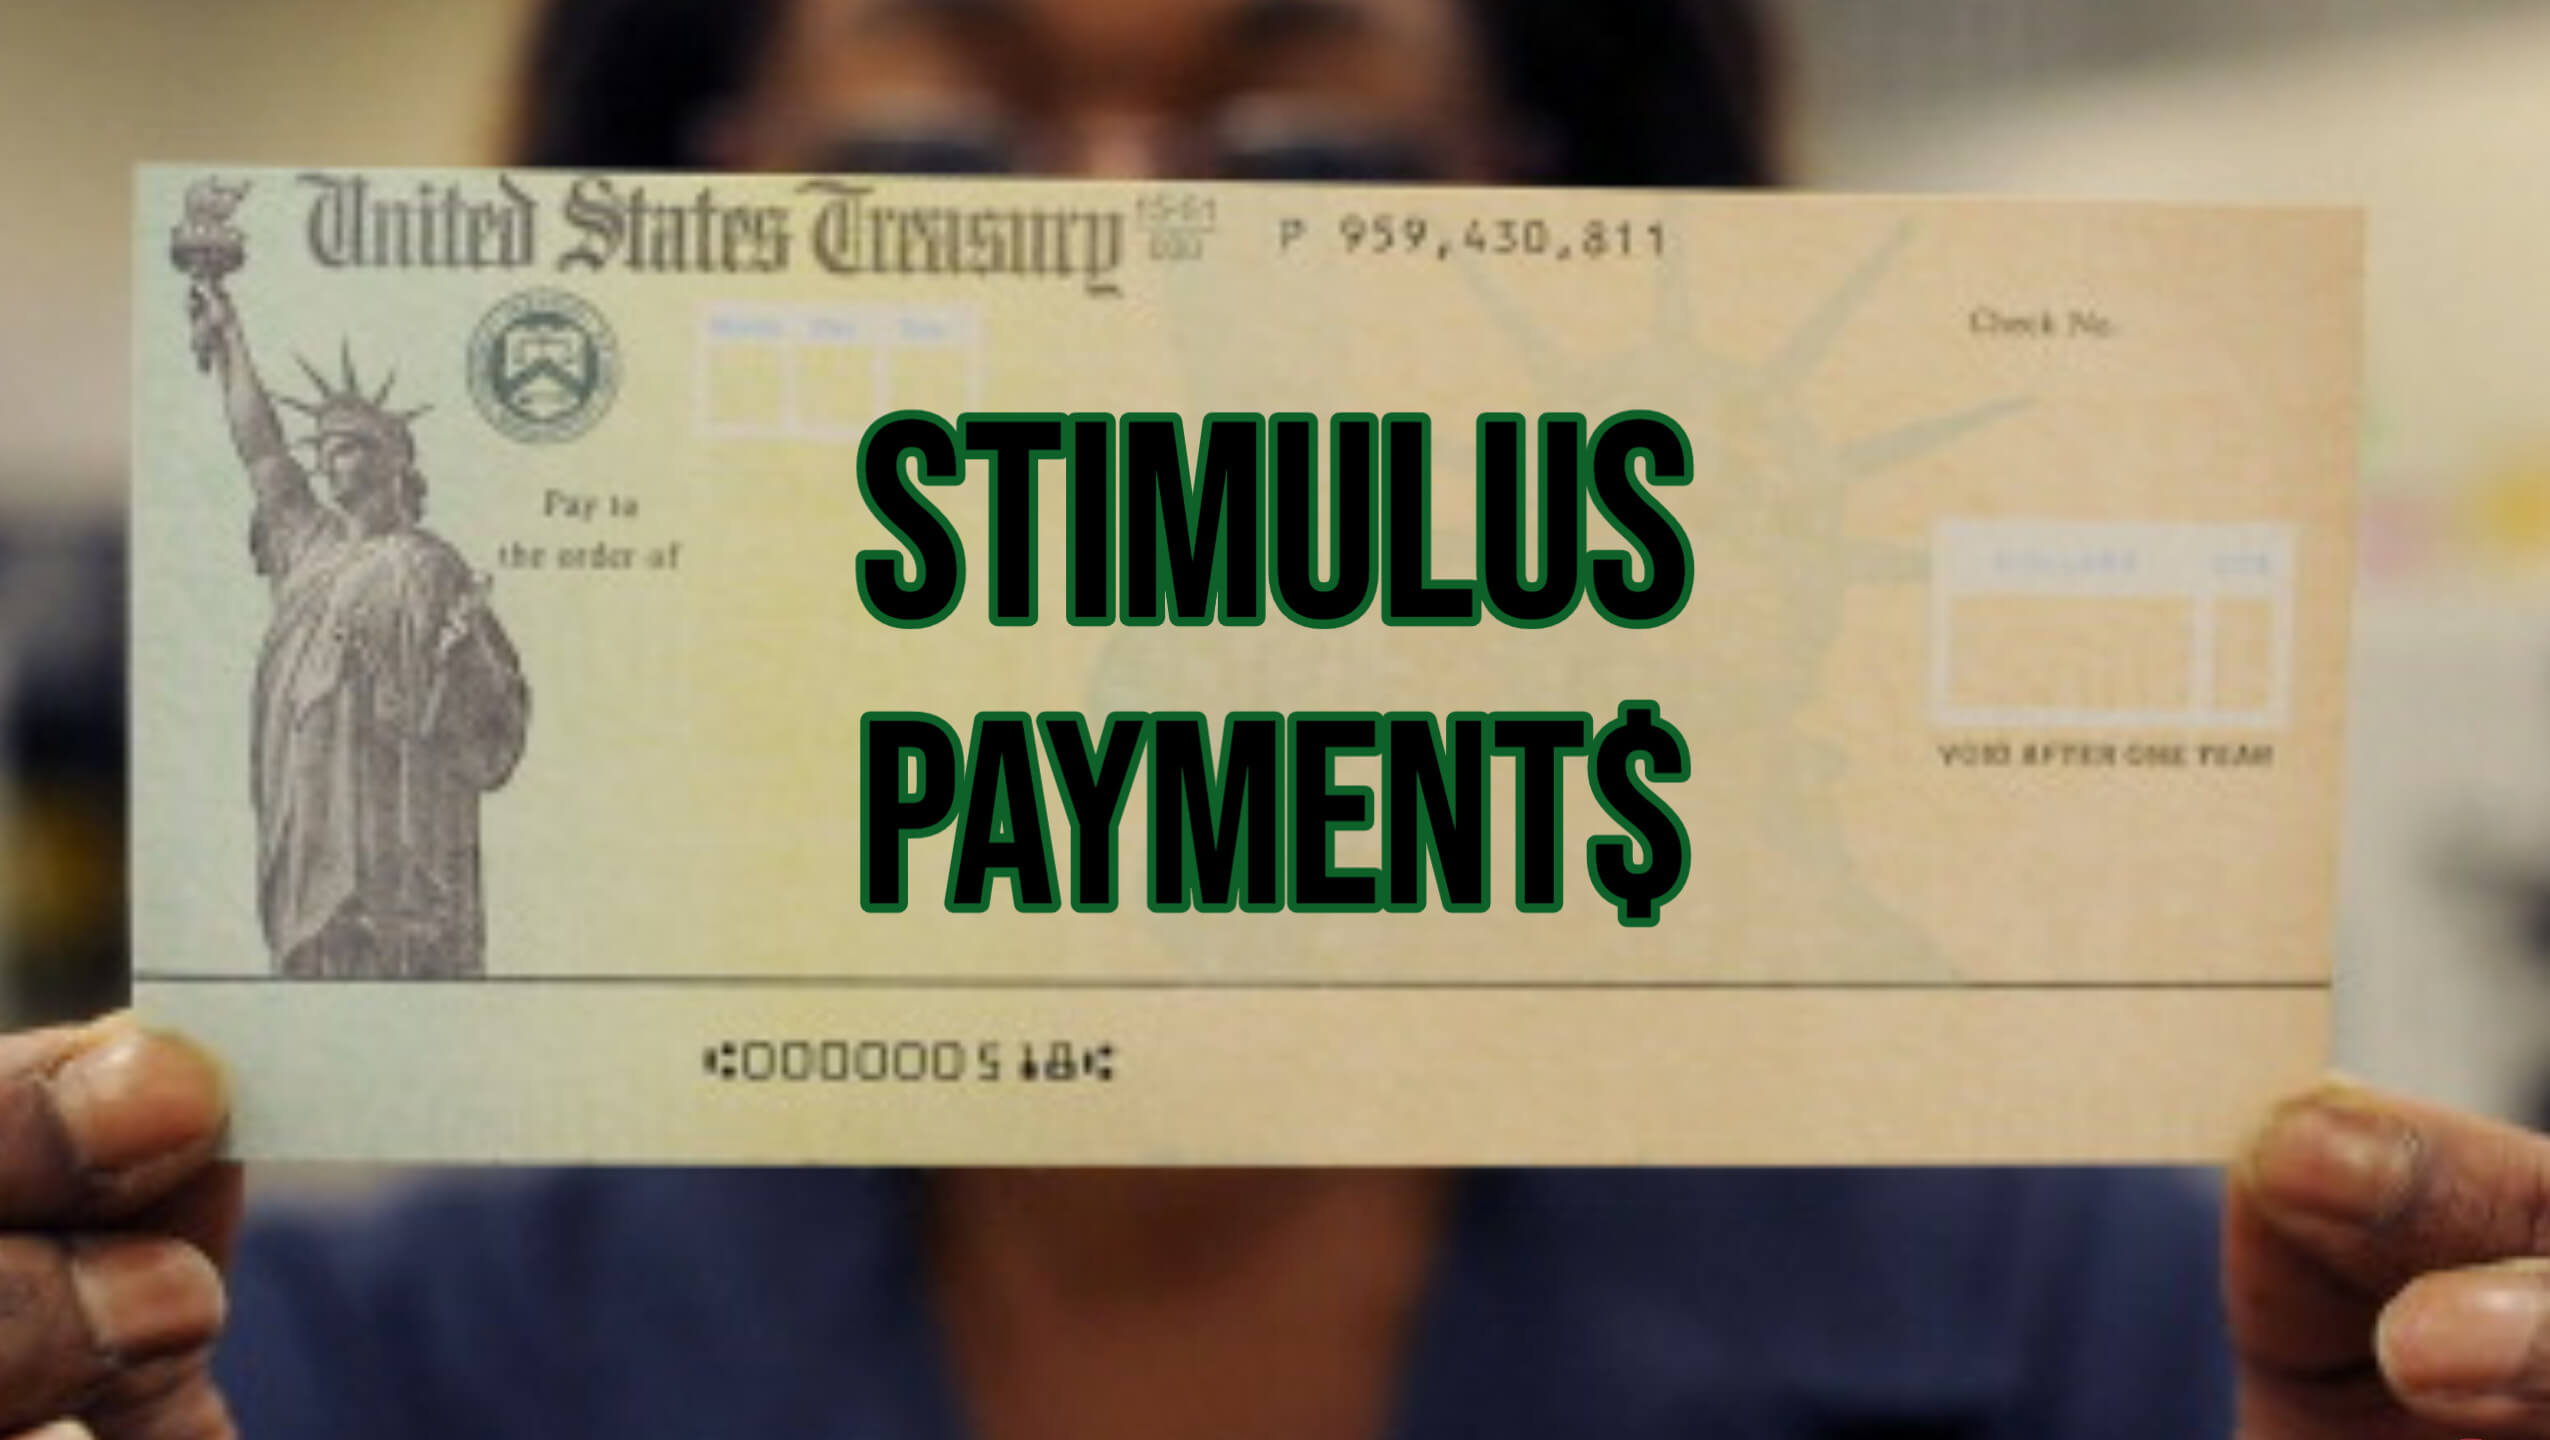 If you used H&R Block, Turbo Tax and other popular tax services there could be a problem with your stimulus money